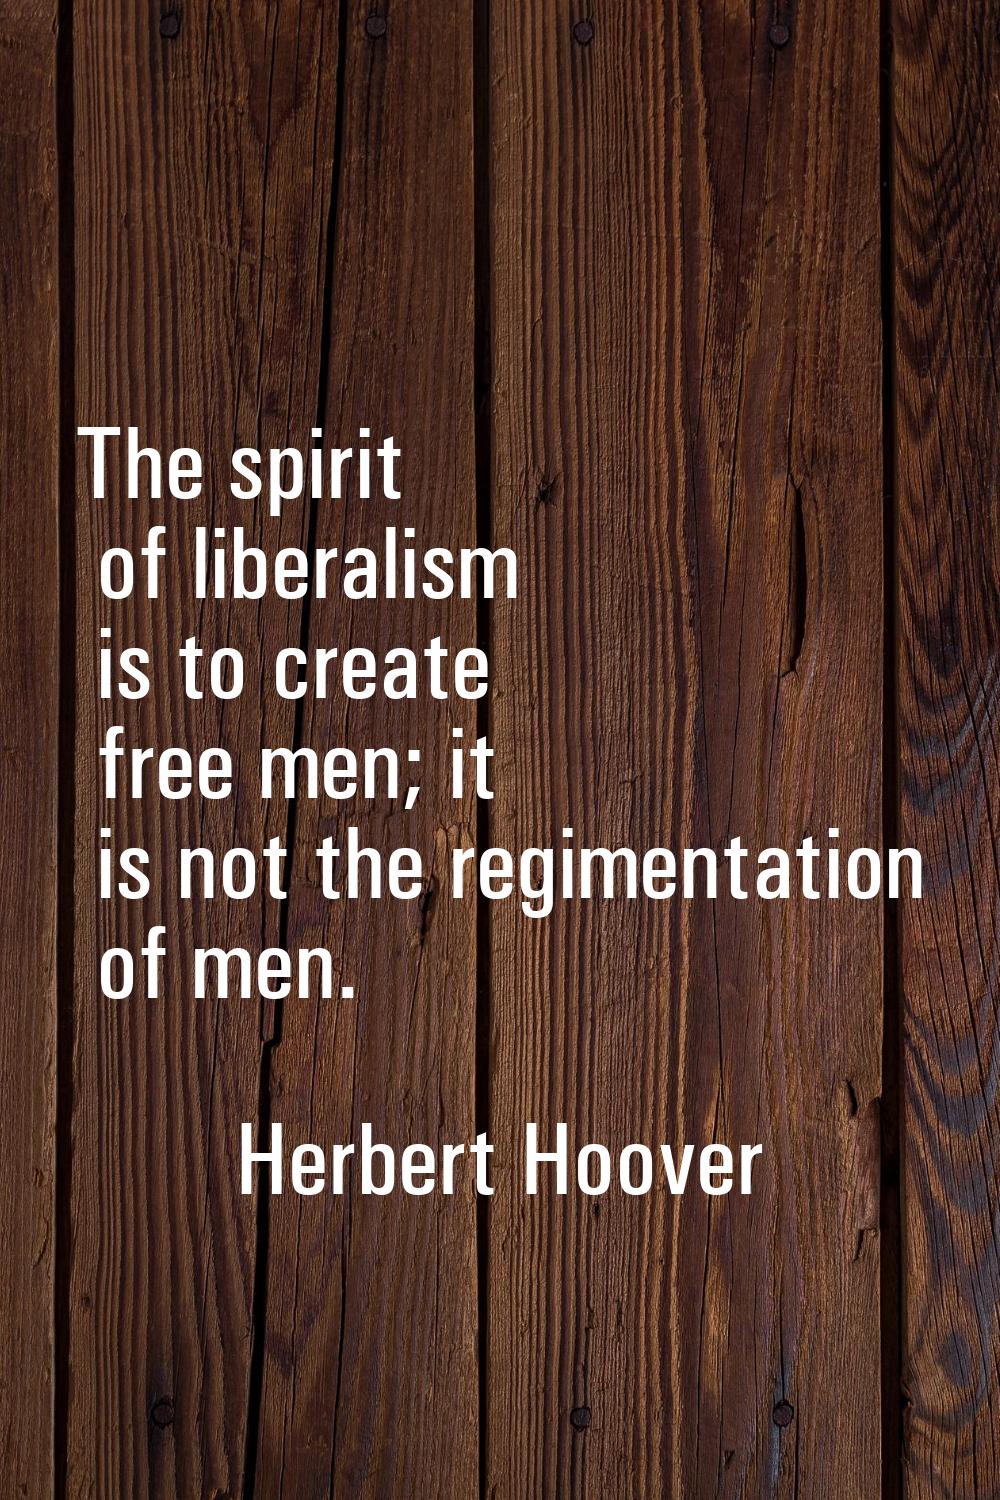 The spirit of liberalism is to create free men; it is not the regimentation of men.